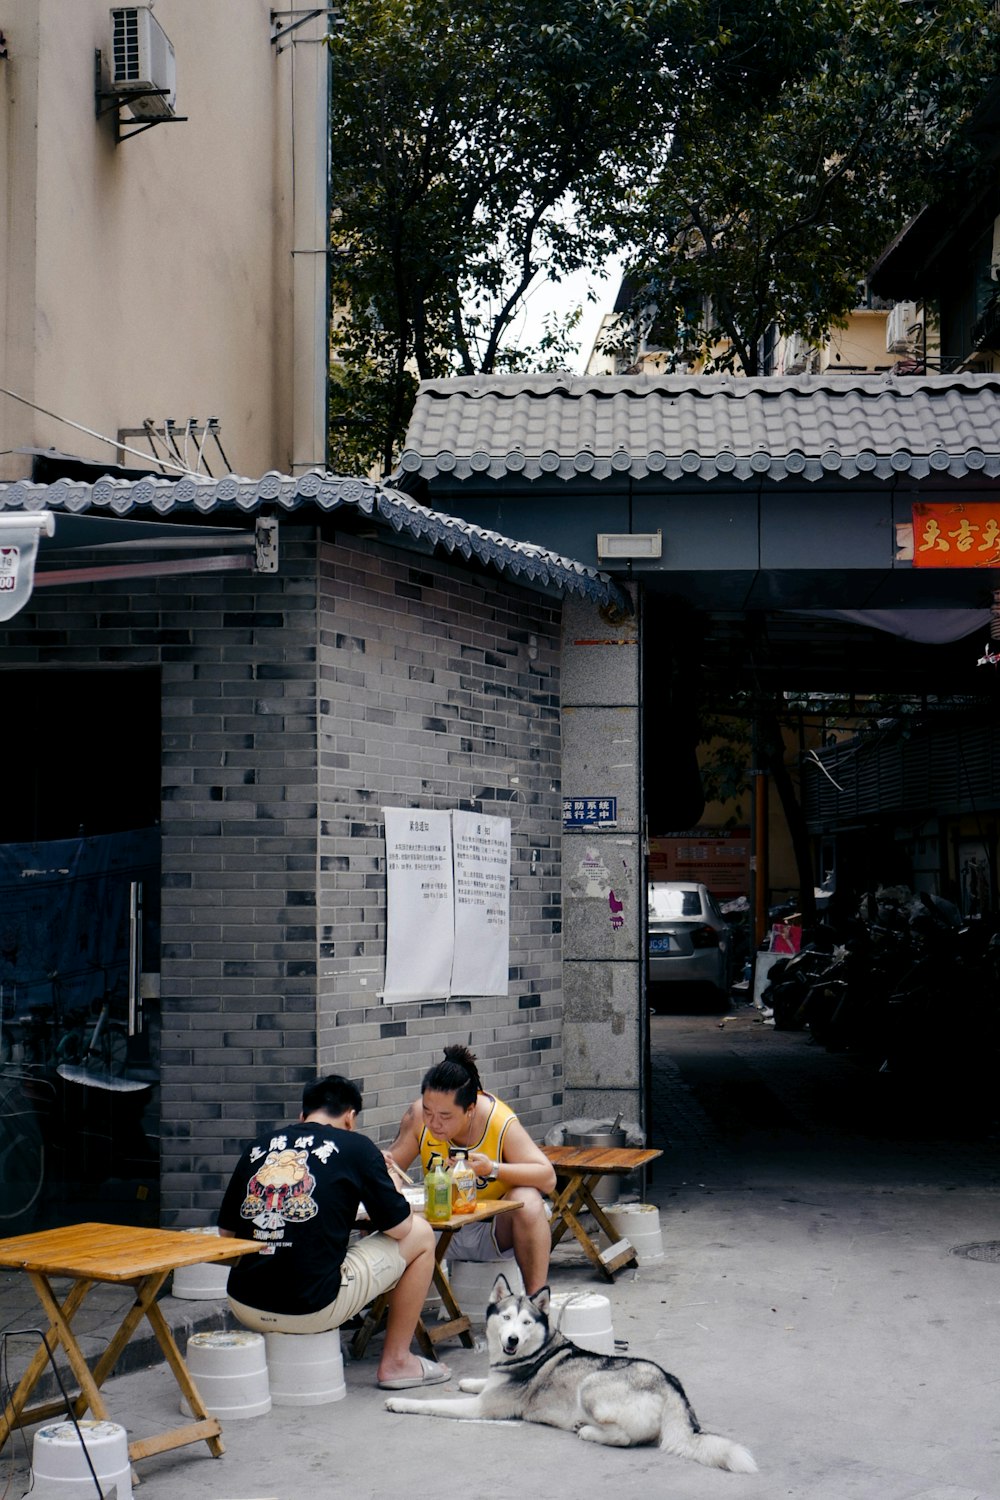 man in yellow shirt sitting on chair near motorcycle during daytime